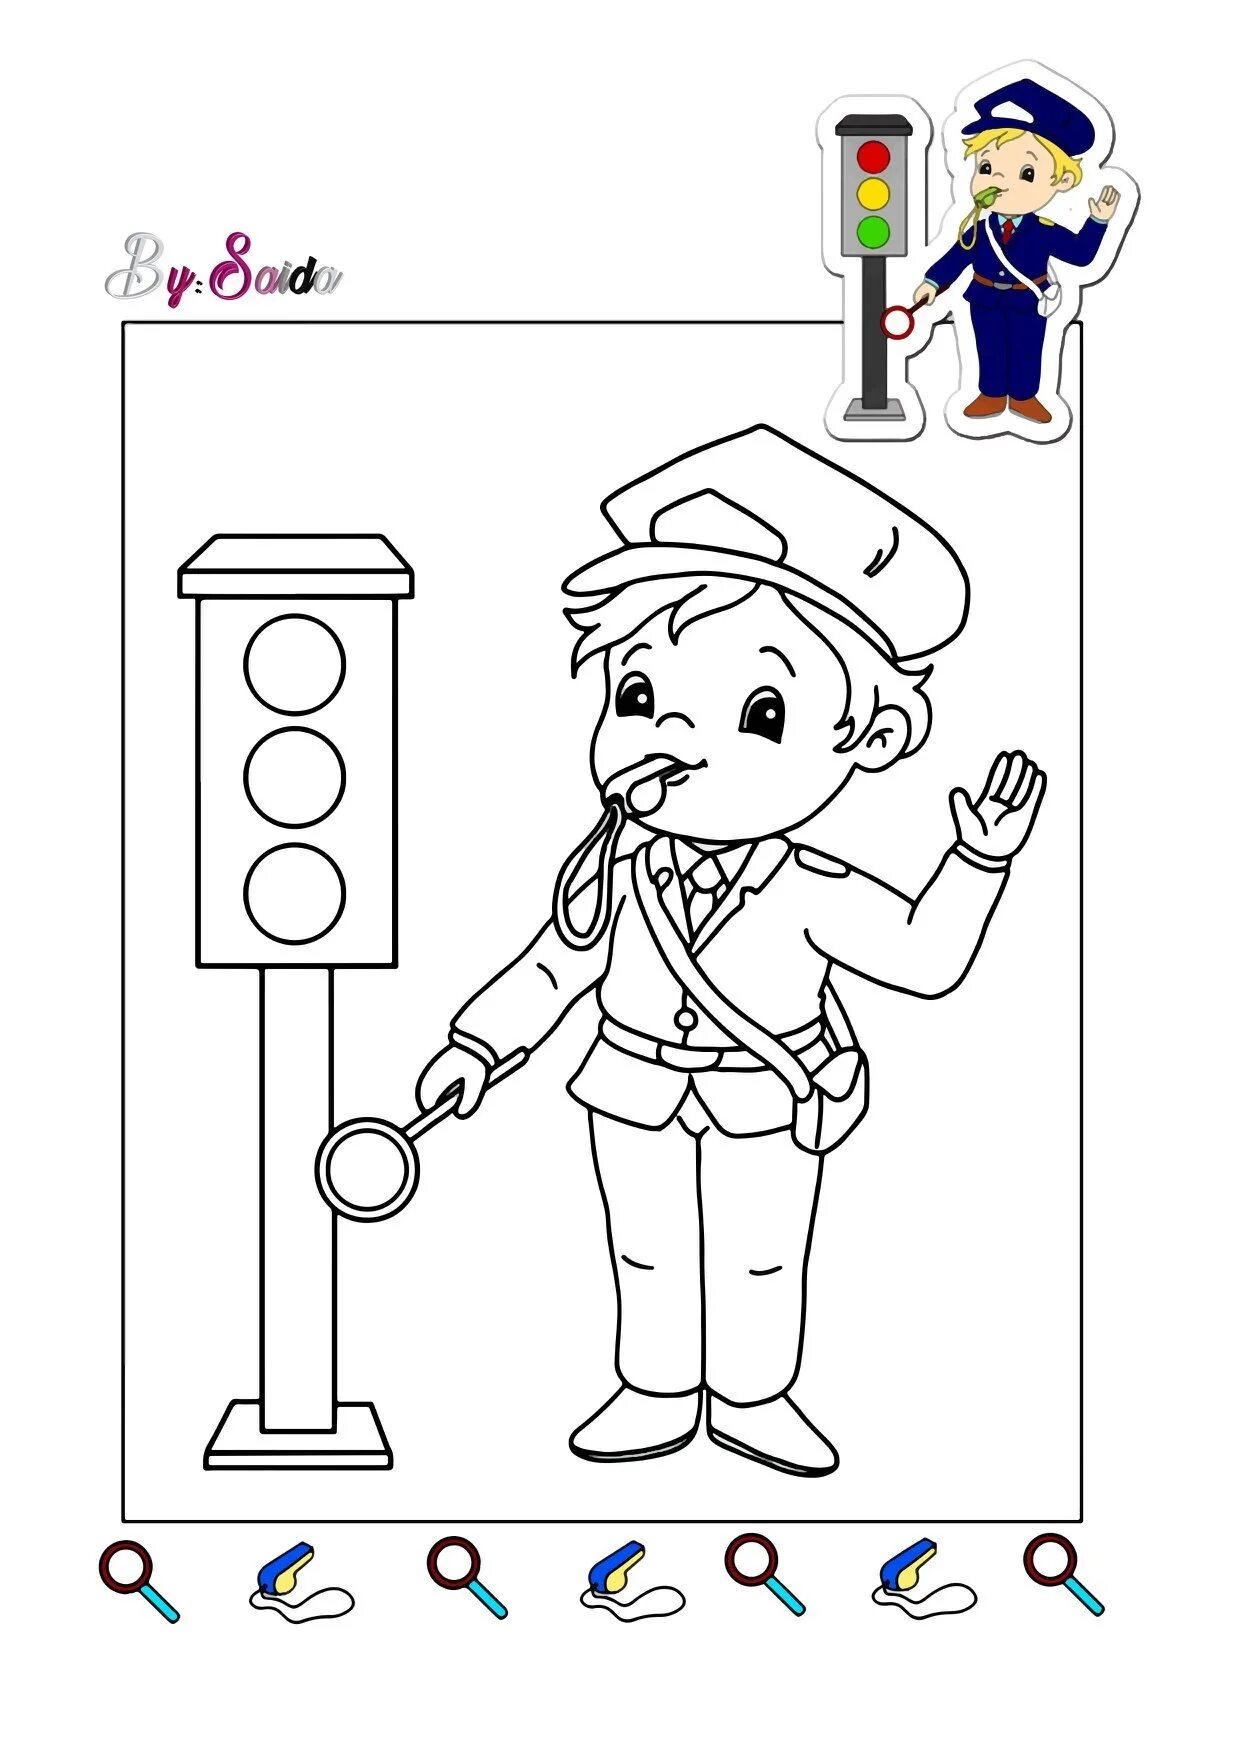 Adorable traffic controller coloring page for kids